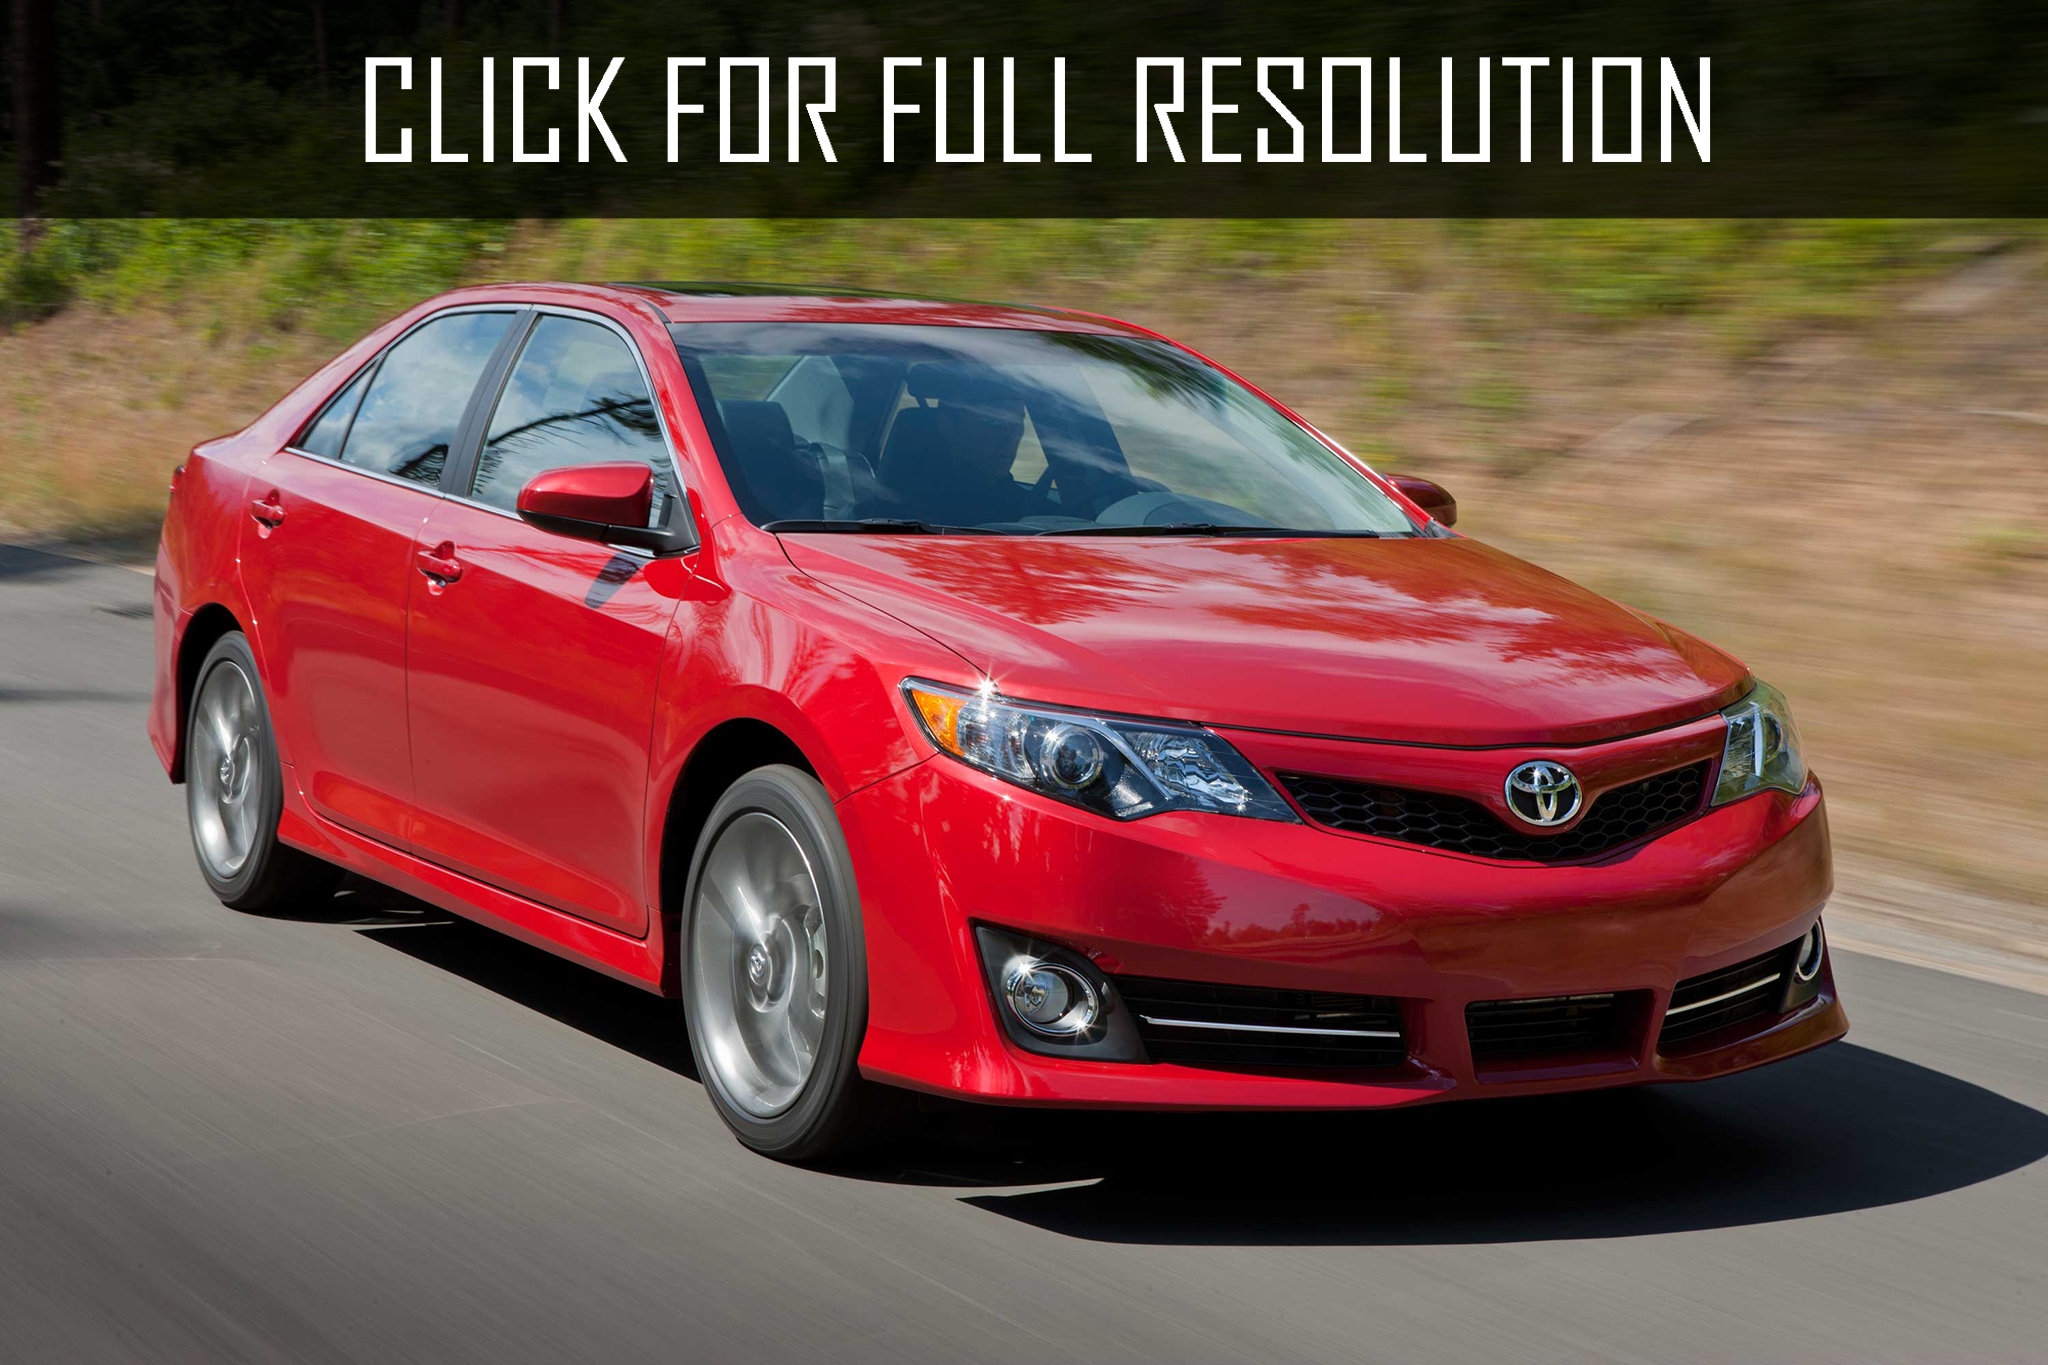 Toyota Camry 6 Cylinder amazing photo gallery, some information and